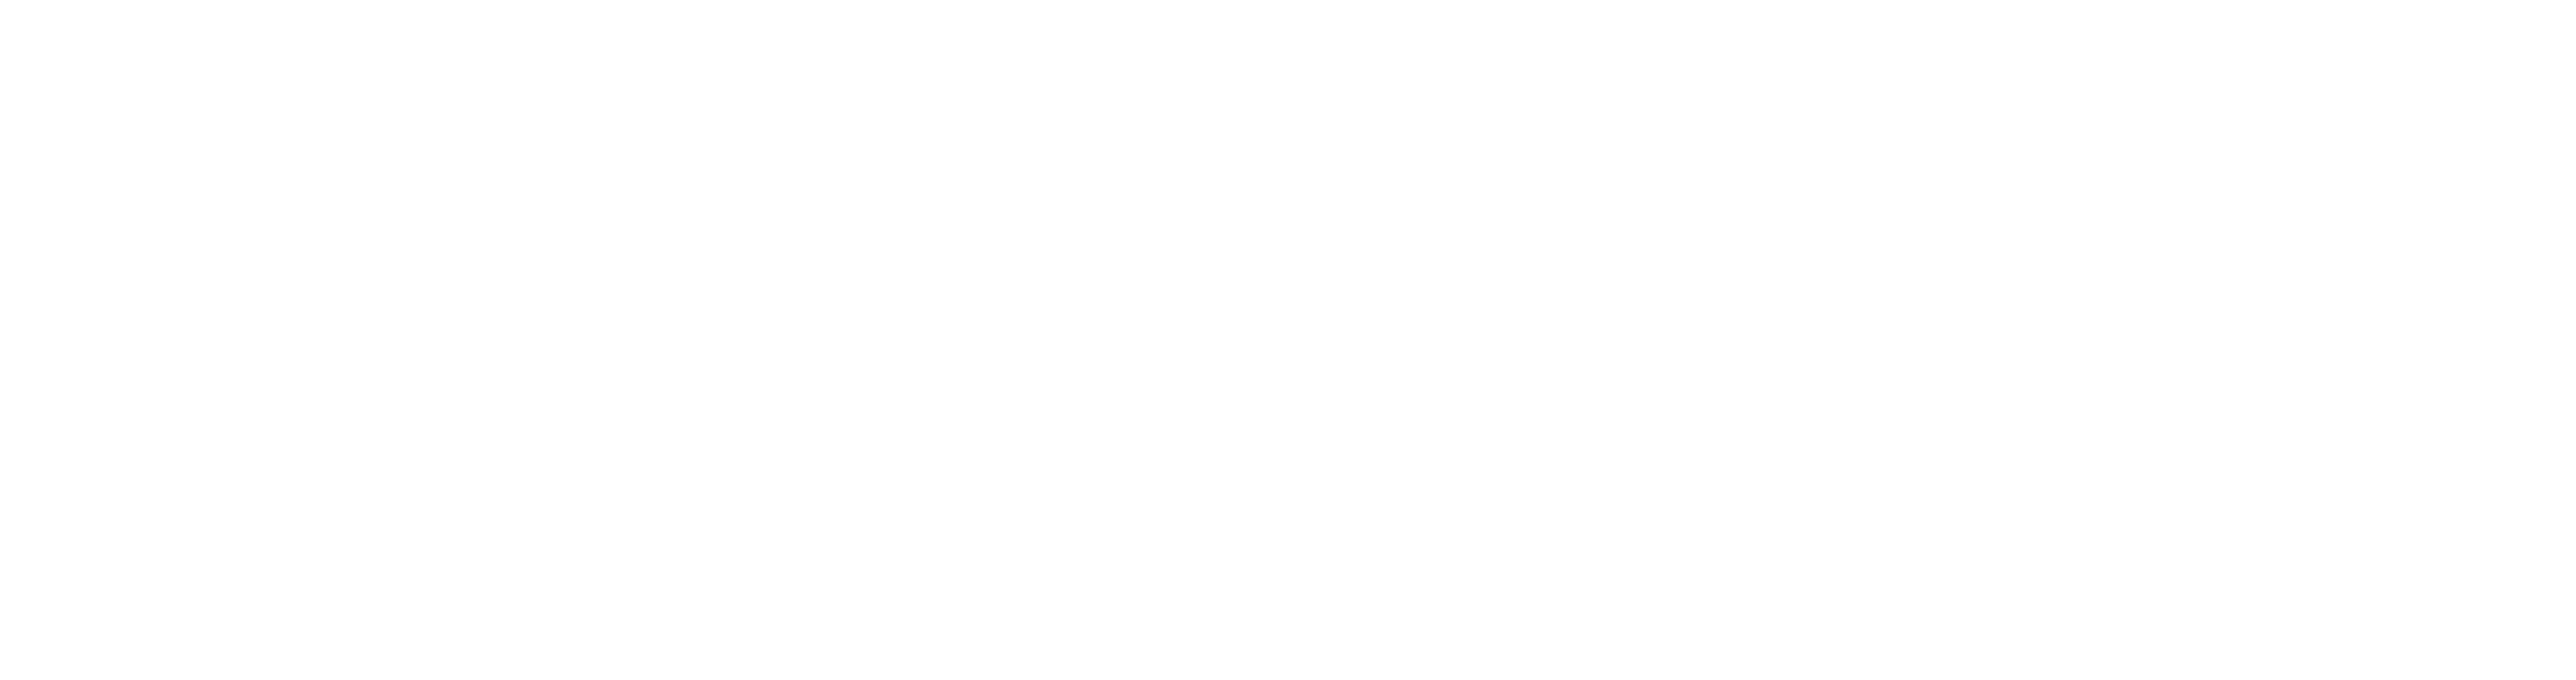 Nold Bryant Planning | Investments